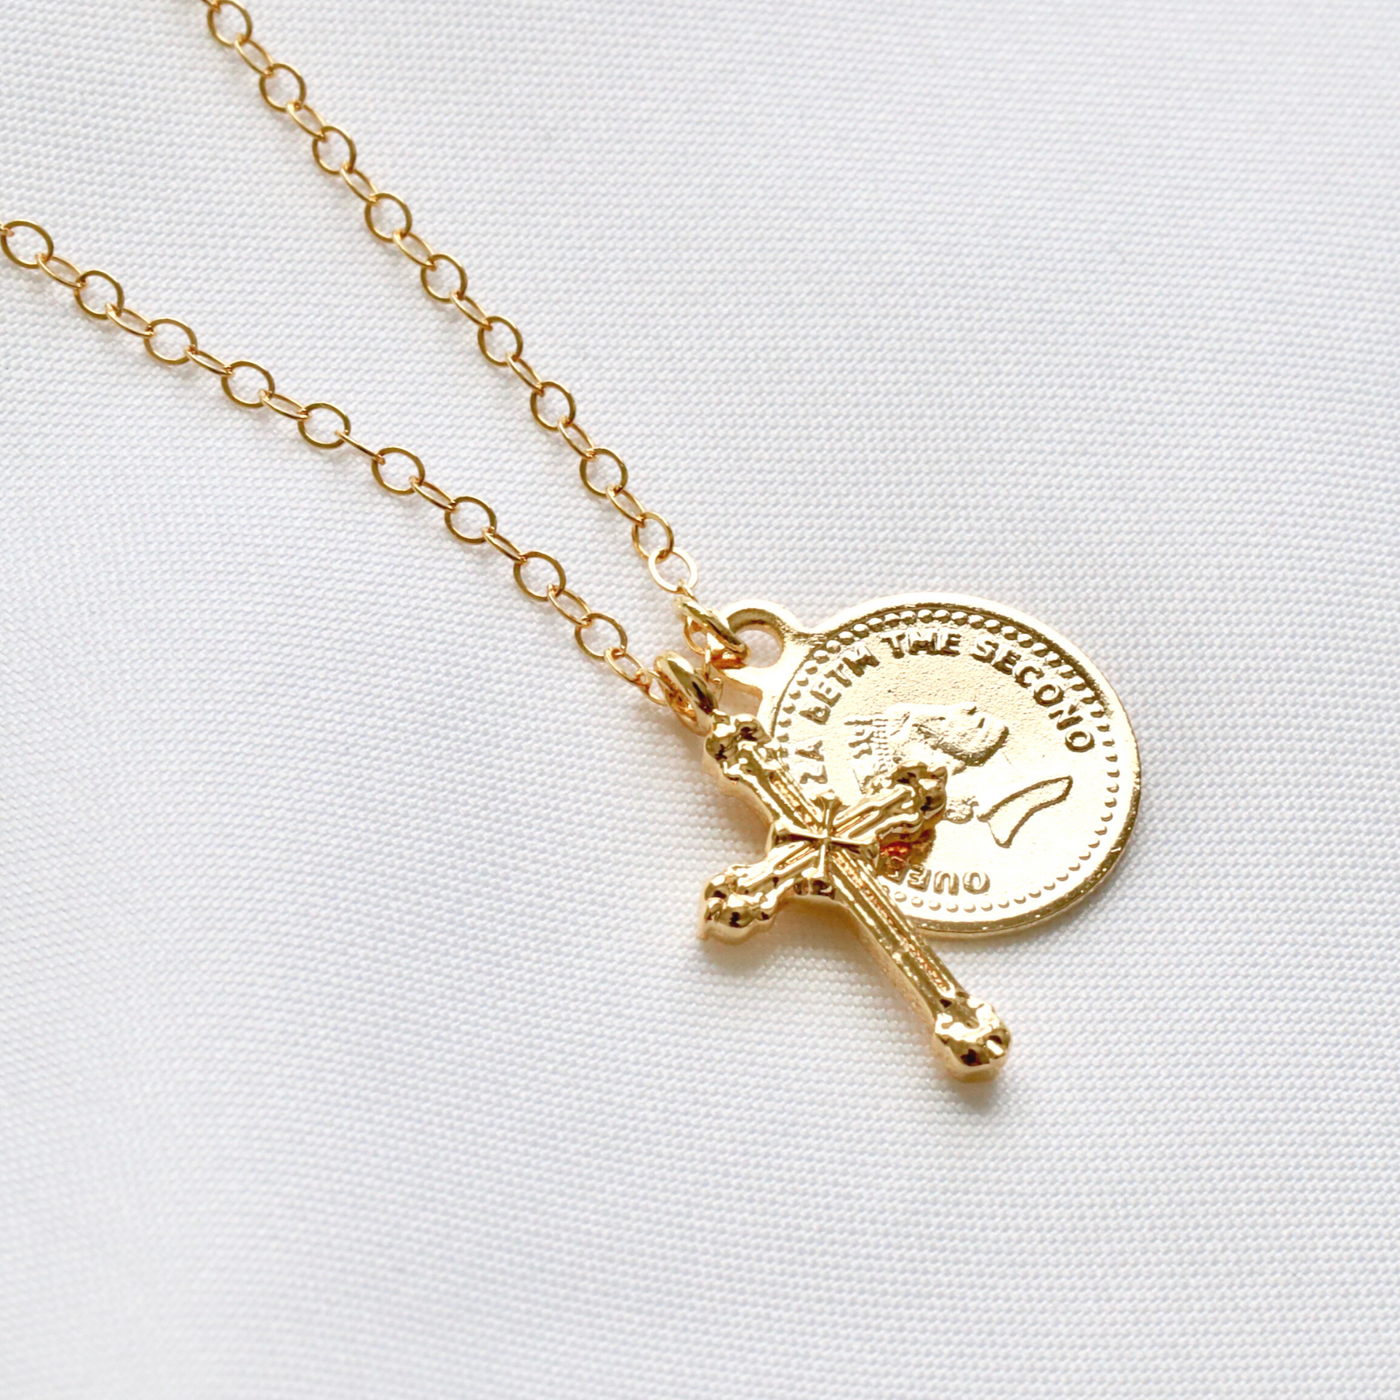 Gold filled coin and cross necklace